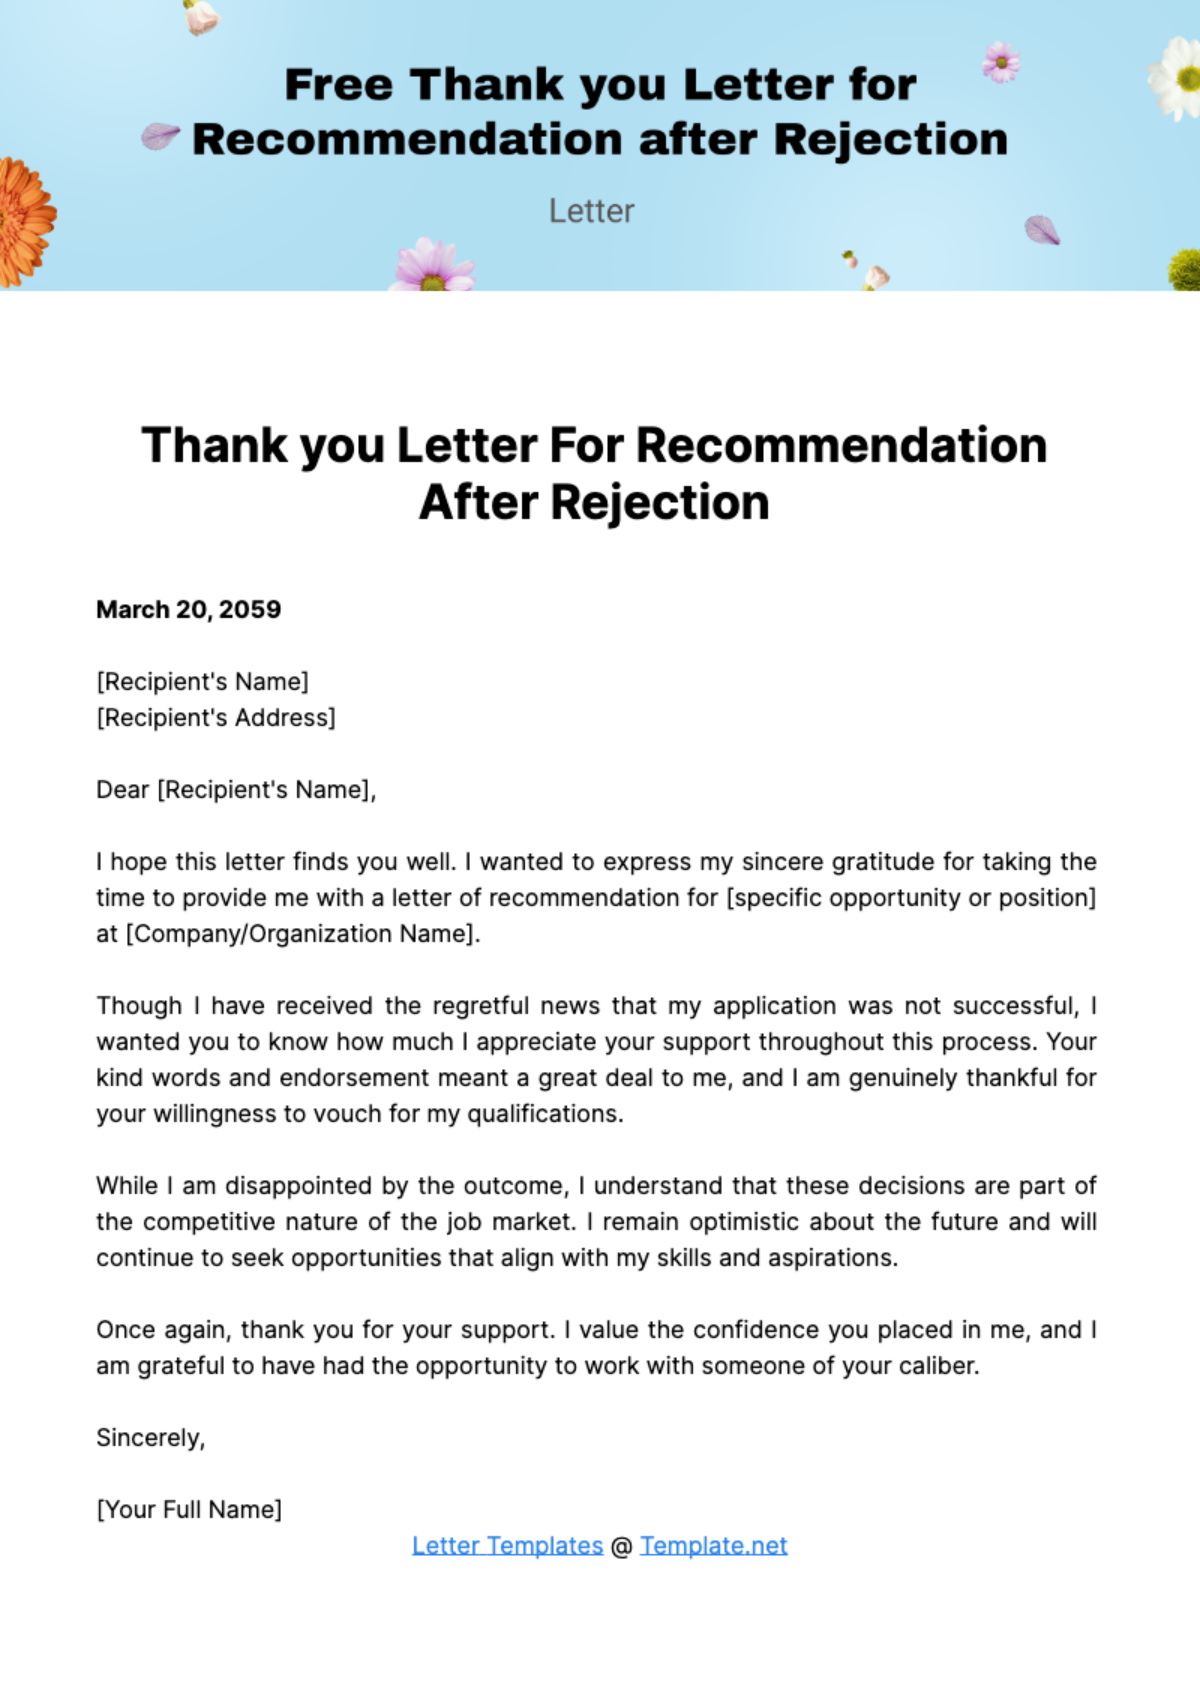 Free Thank you Letter for Recommendation after Rejection Template